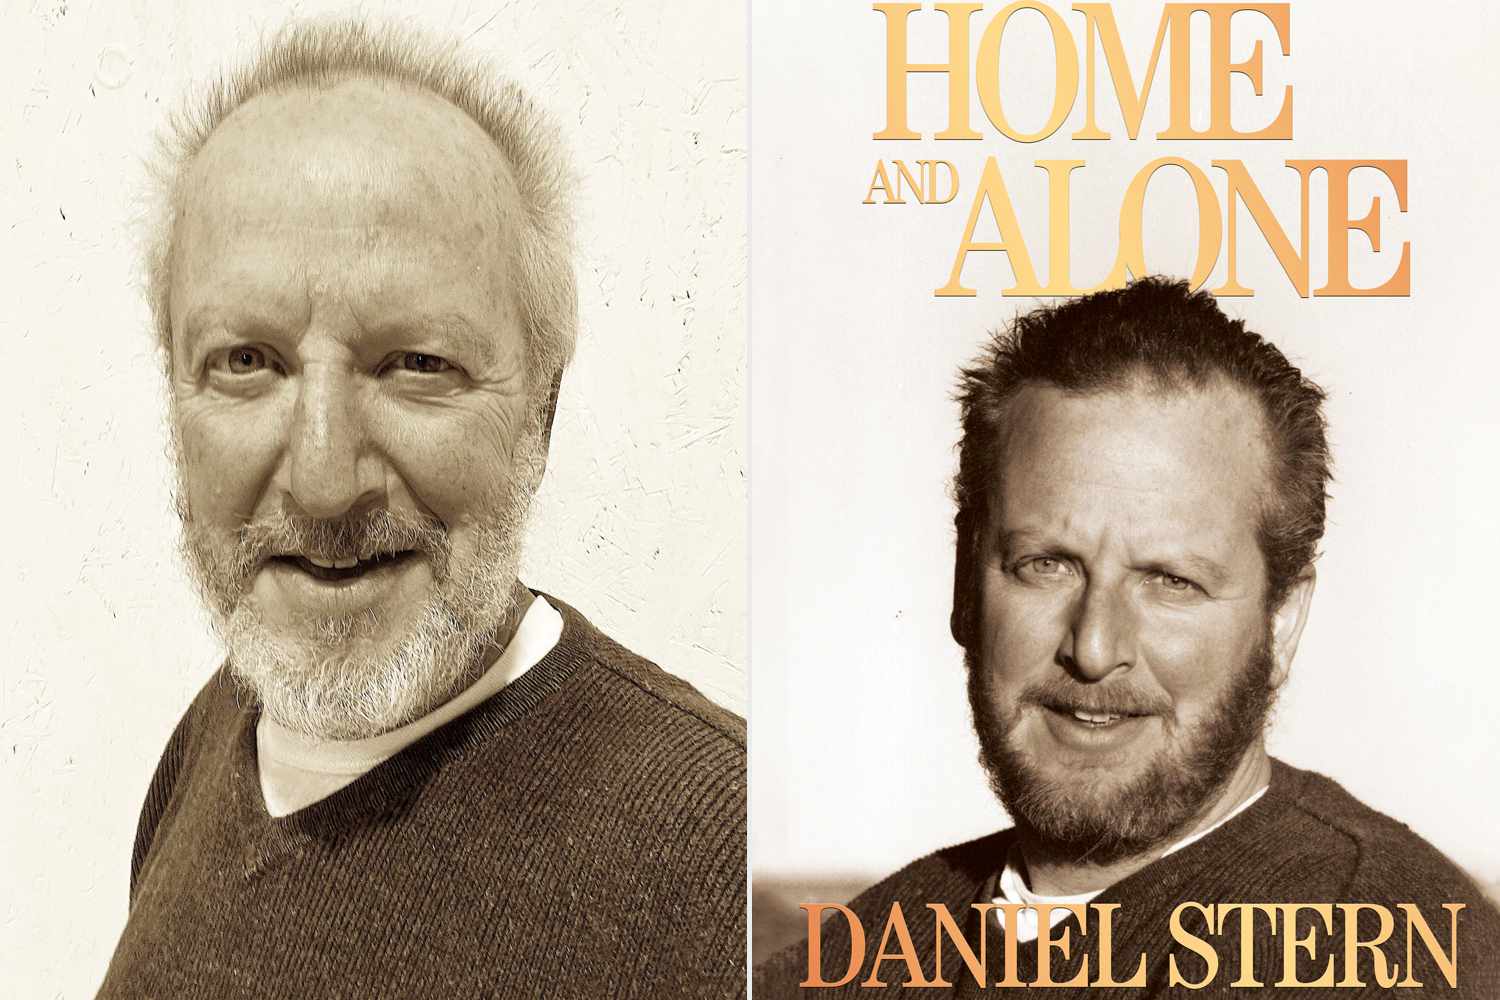 Daniel Stern Reveals What Shooting Home Alone Was Really Like — And it Involves a "Tarantula Wrangler" (Exclusive)